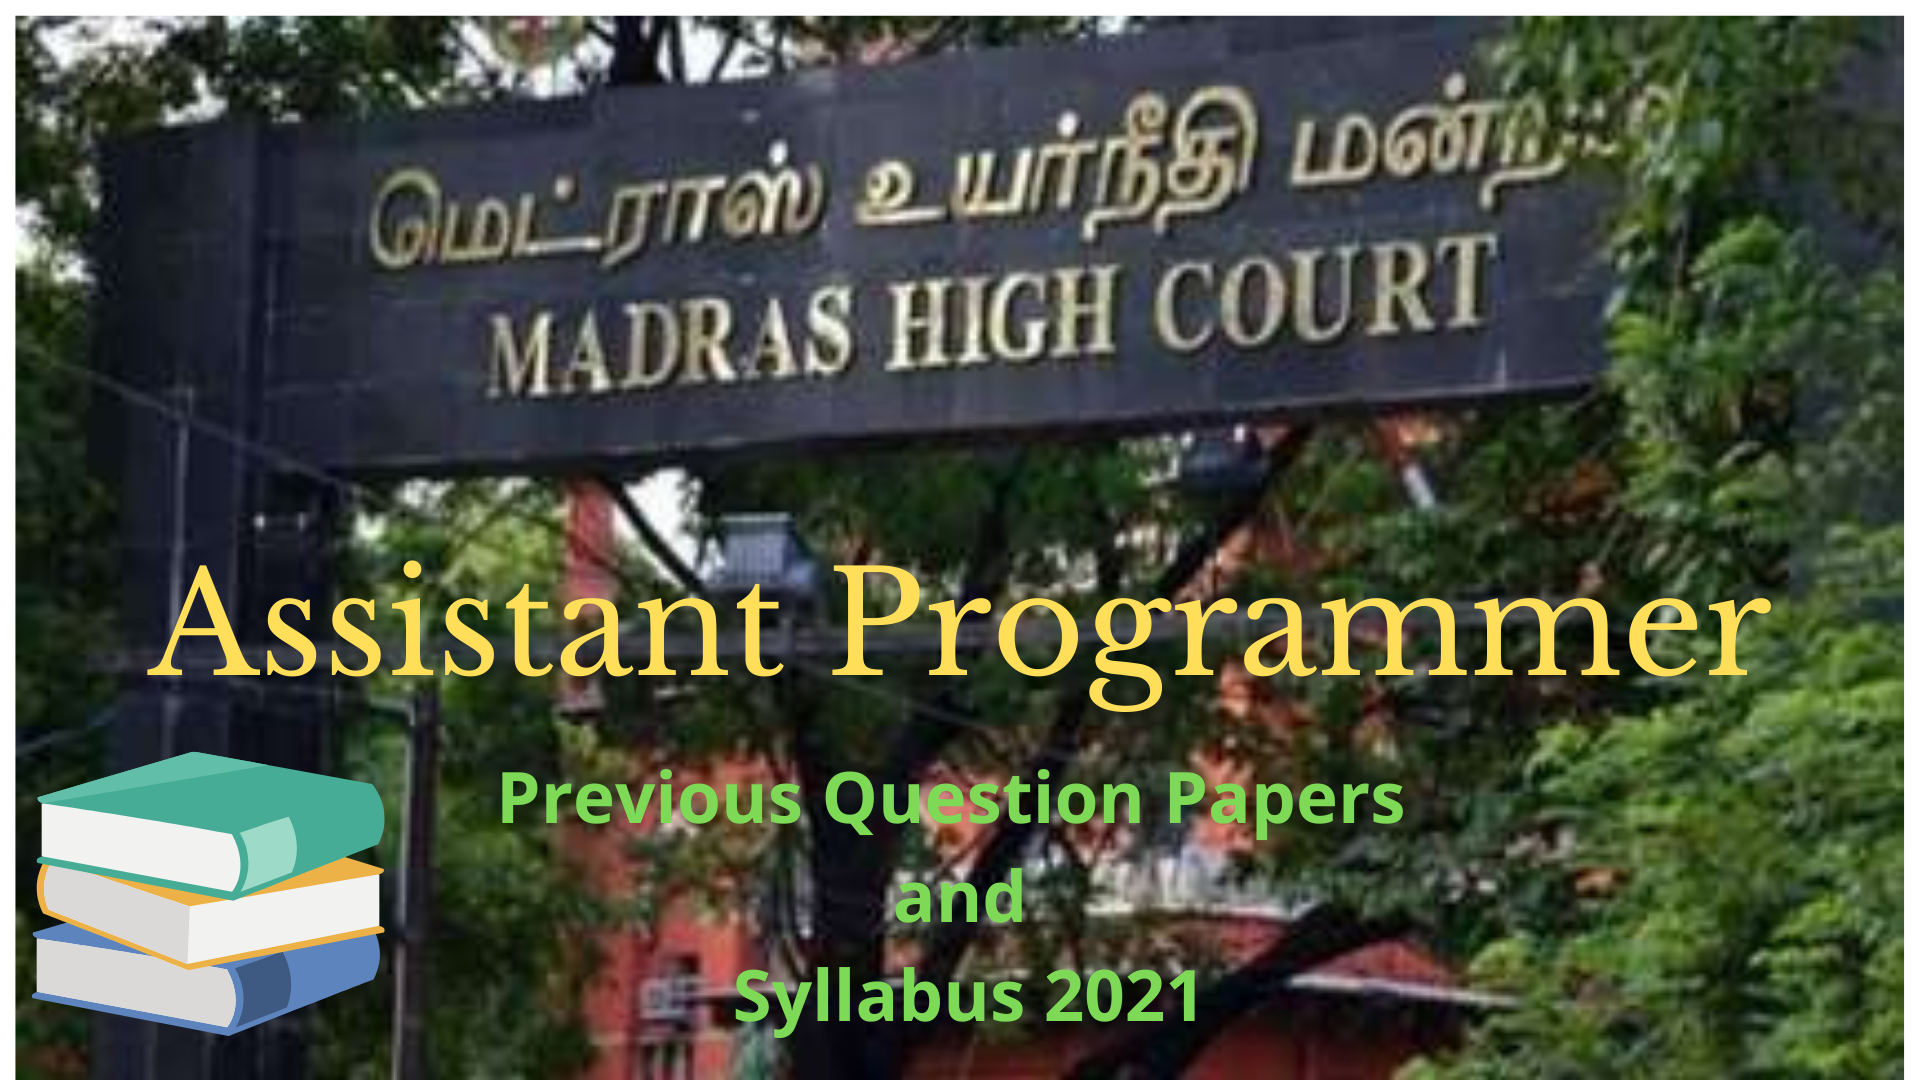 Madras High Court (MHC) Assistant Programmer Previous Question Papers